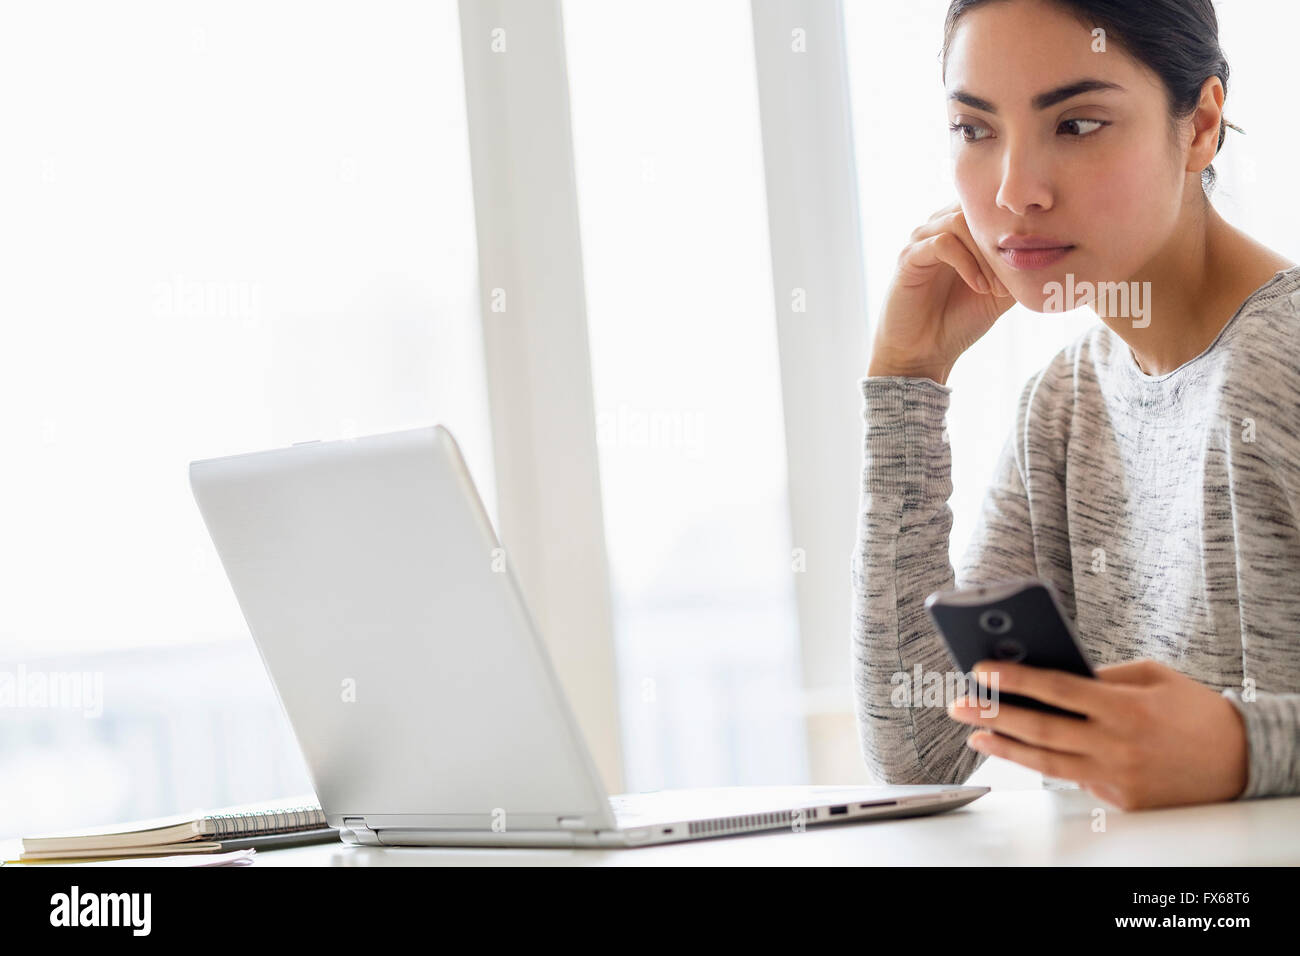 Hispanic woman using cell phone and laptop Stock Photo